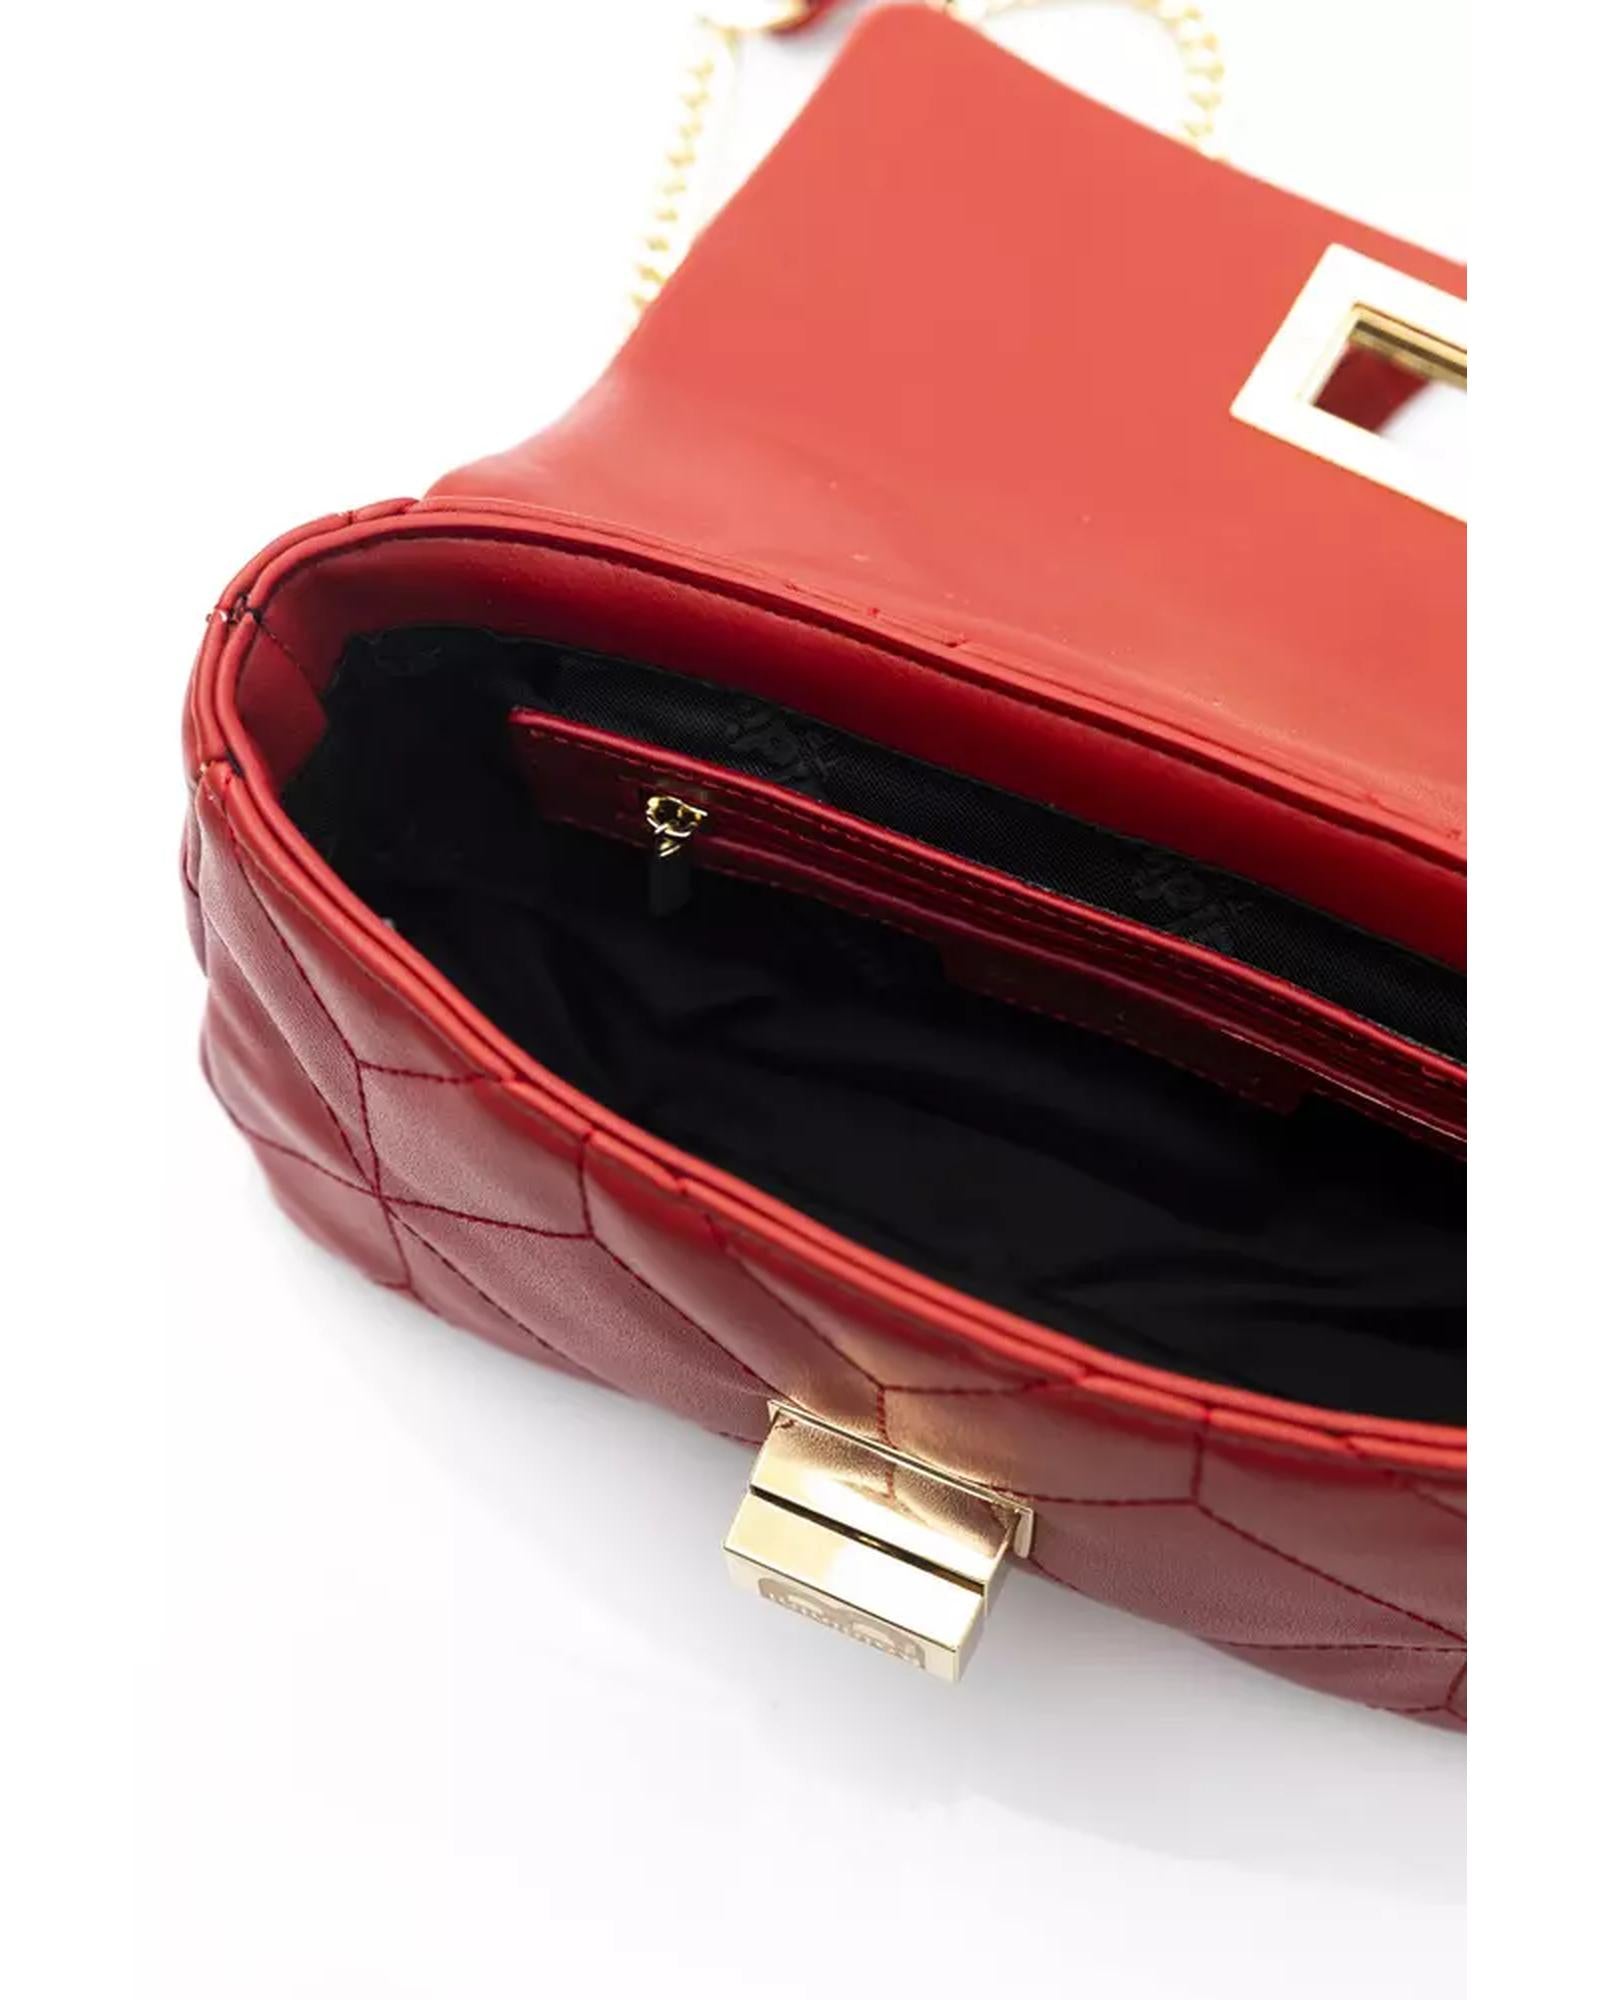 Flap Closure Leather Shoulder Bag with Internal Compartments One Size Women